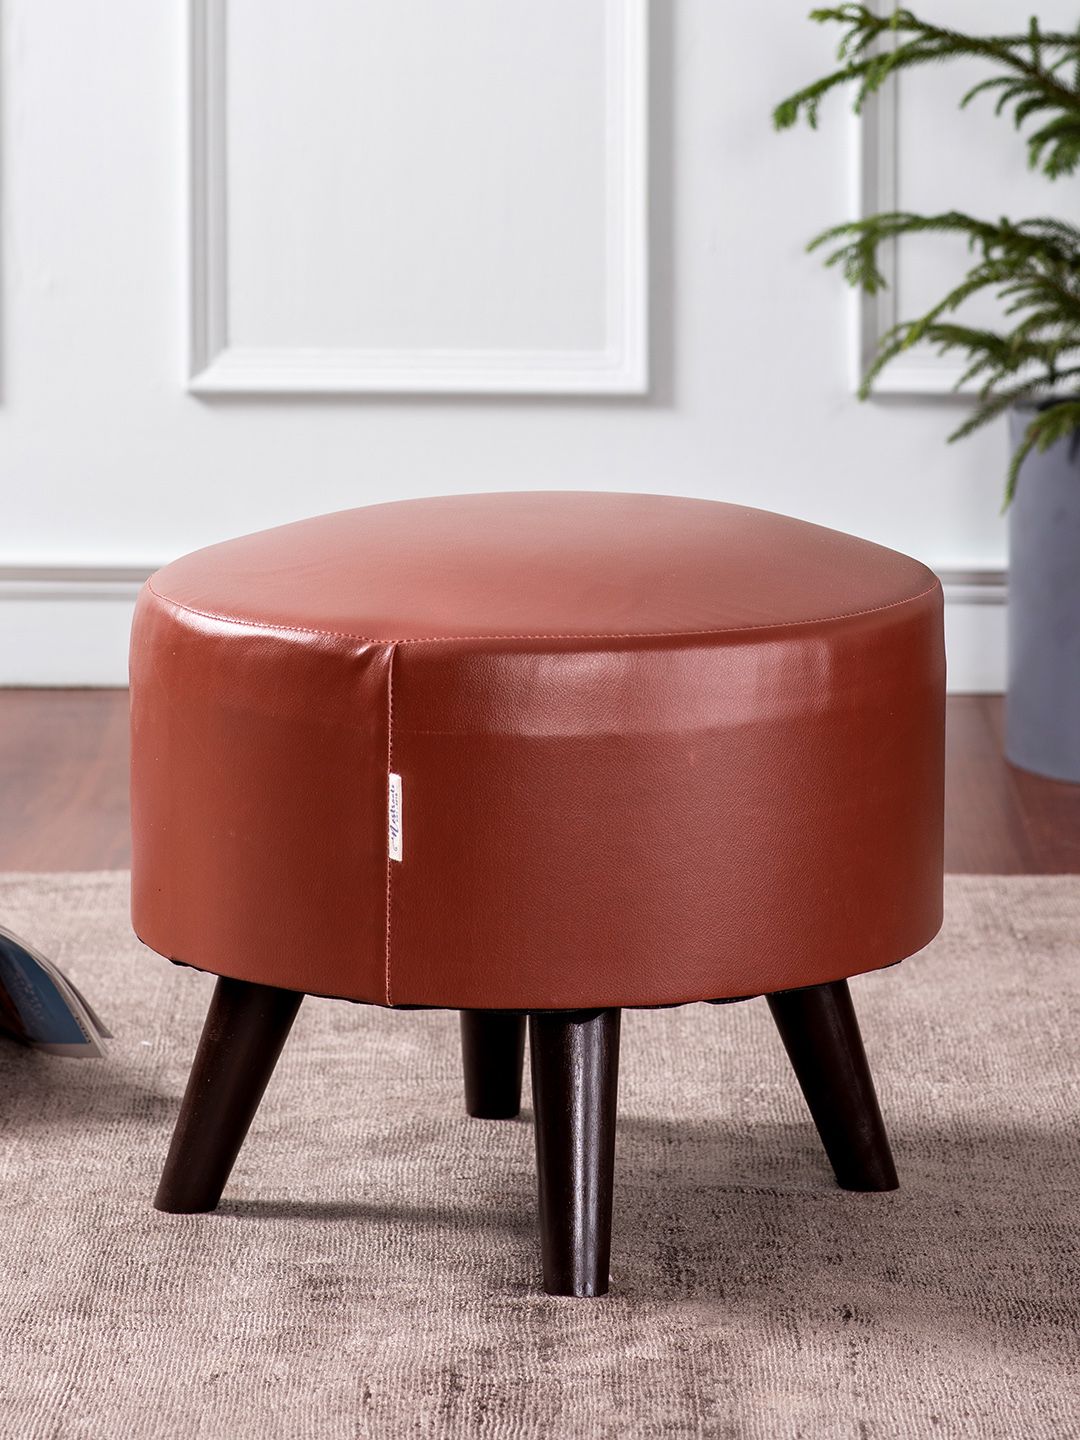 nestroots Brown Round Shape Wooden Cotton Poufy Ottoman Price in India